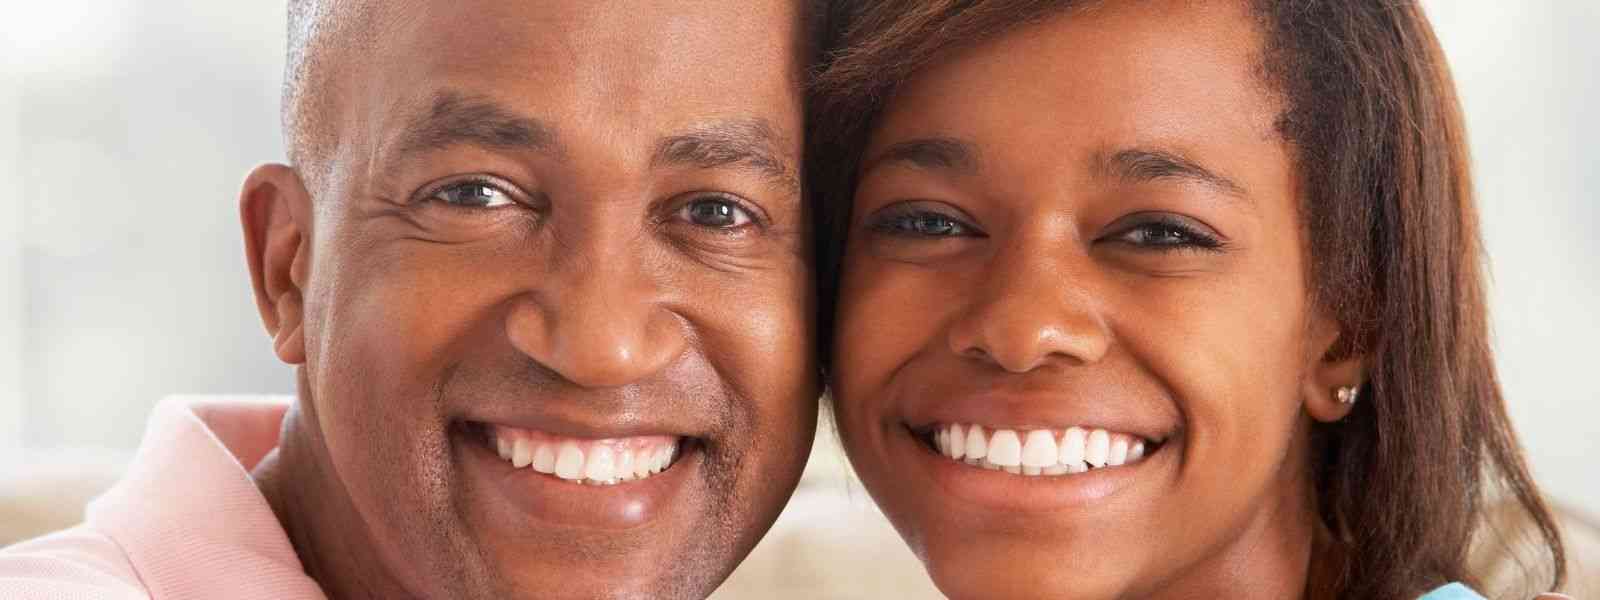 Closeup of Two people smiling happy